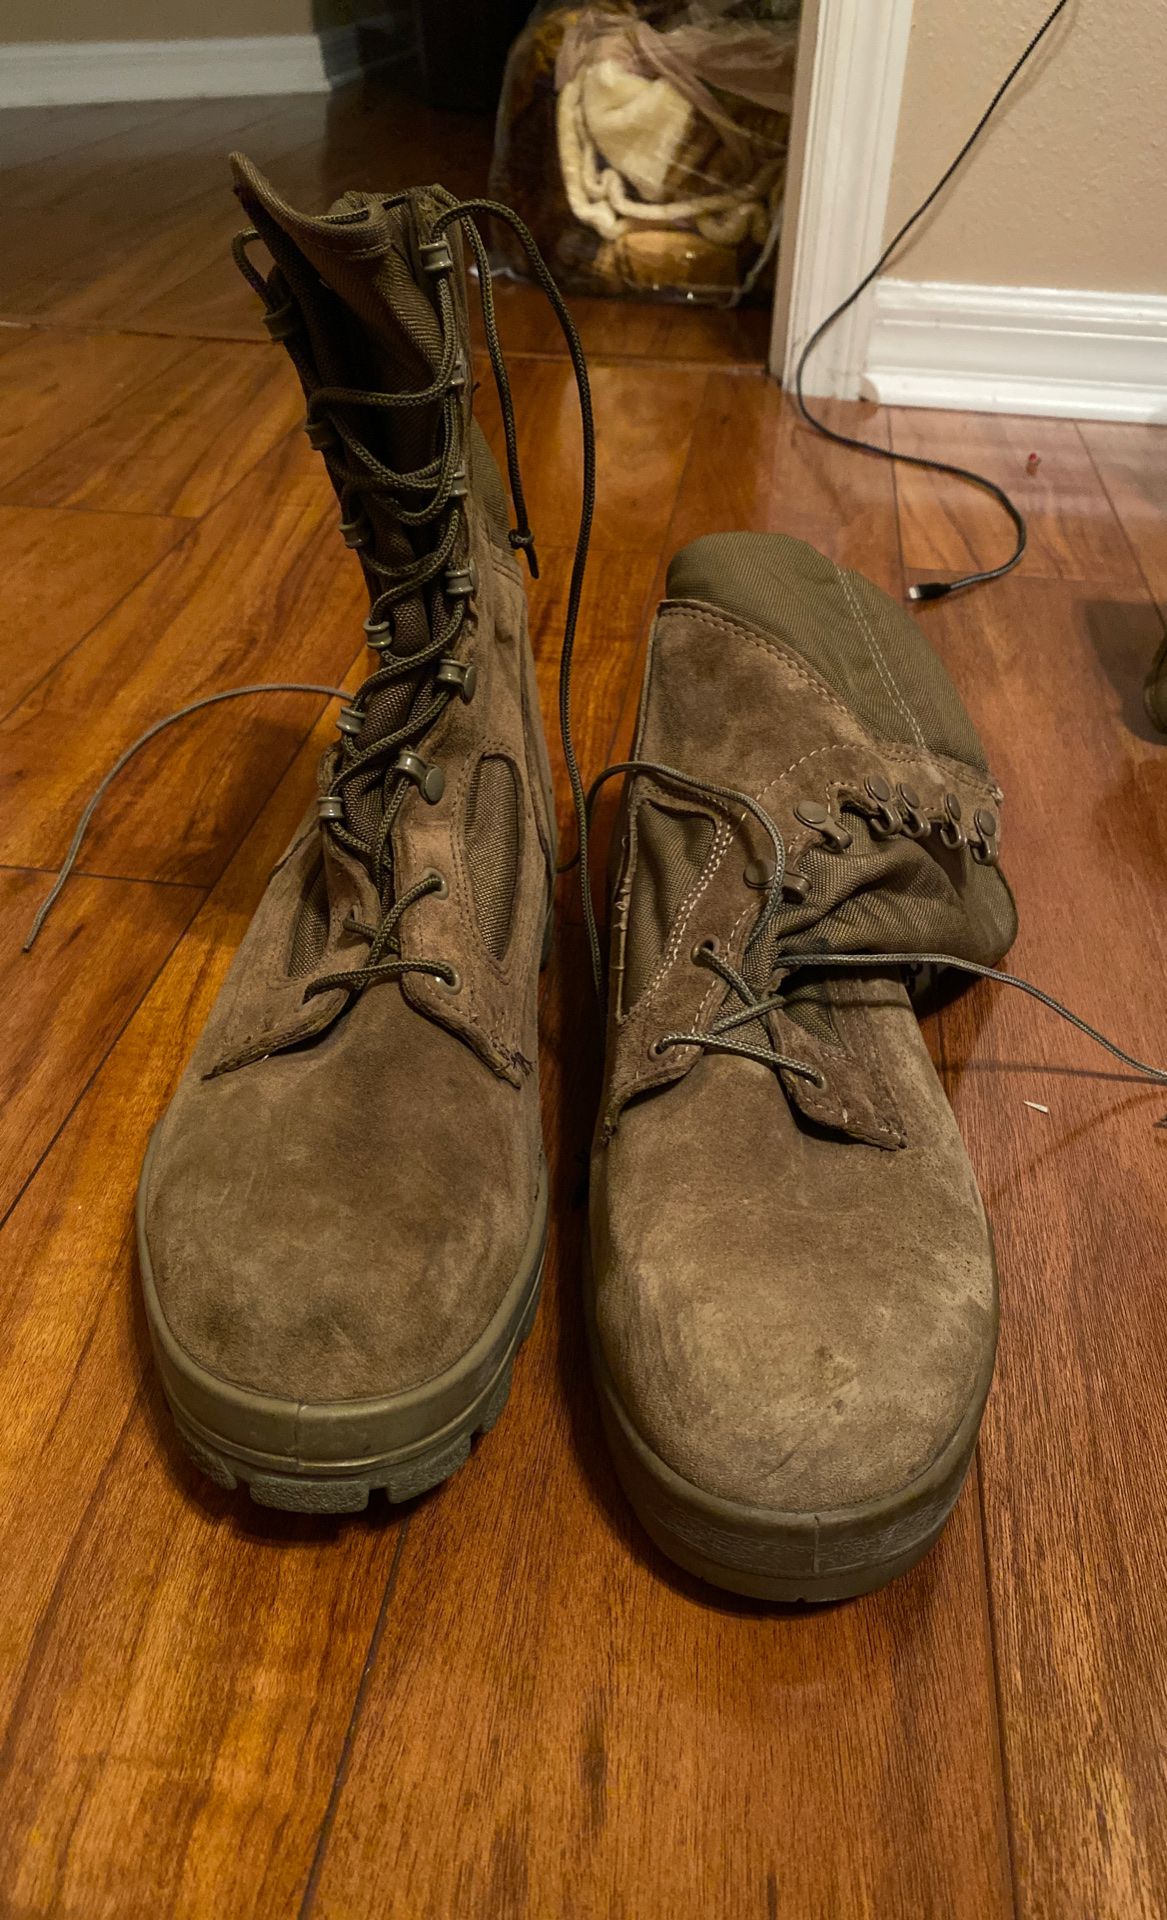 Used military boots size 12.5